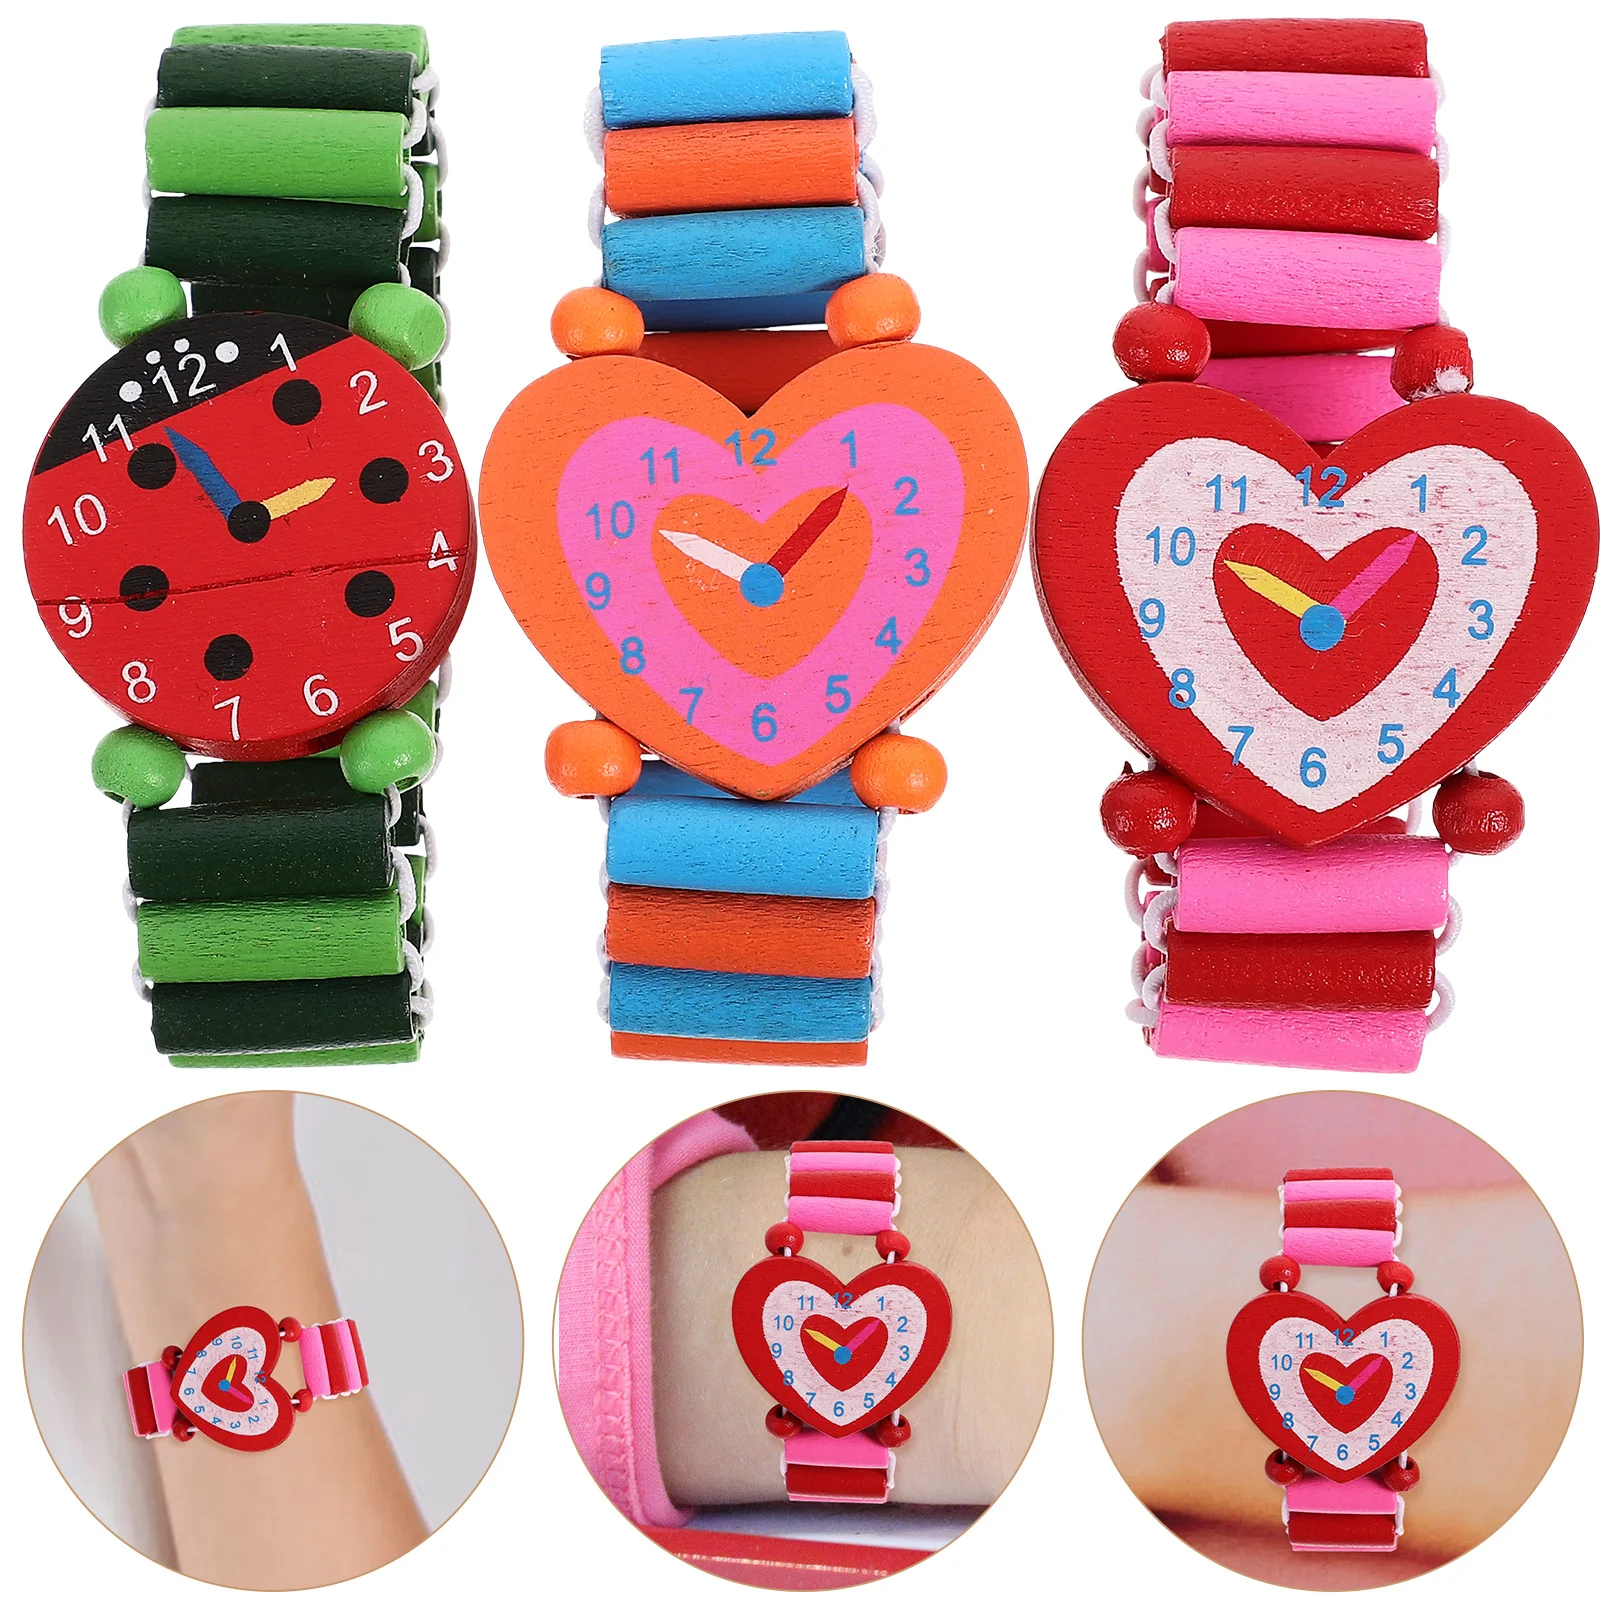 

Wooden Watch Clock Learning for Kids Teaching Time Toys 3pcs Early Educational for Toddlers Children Christmas